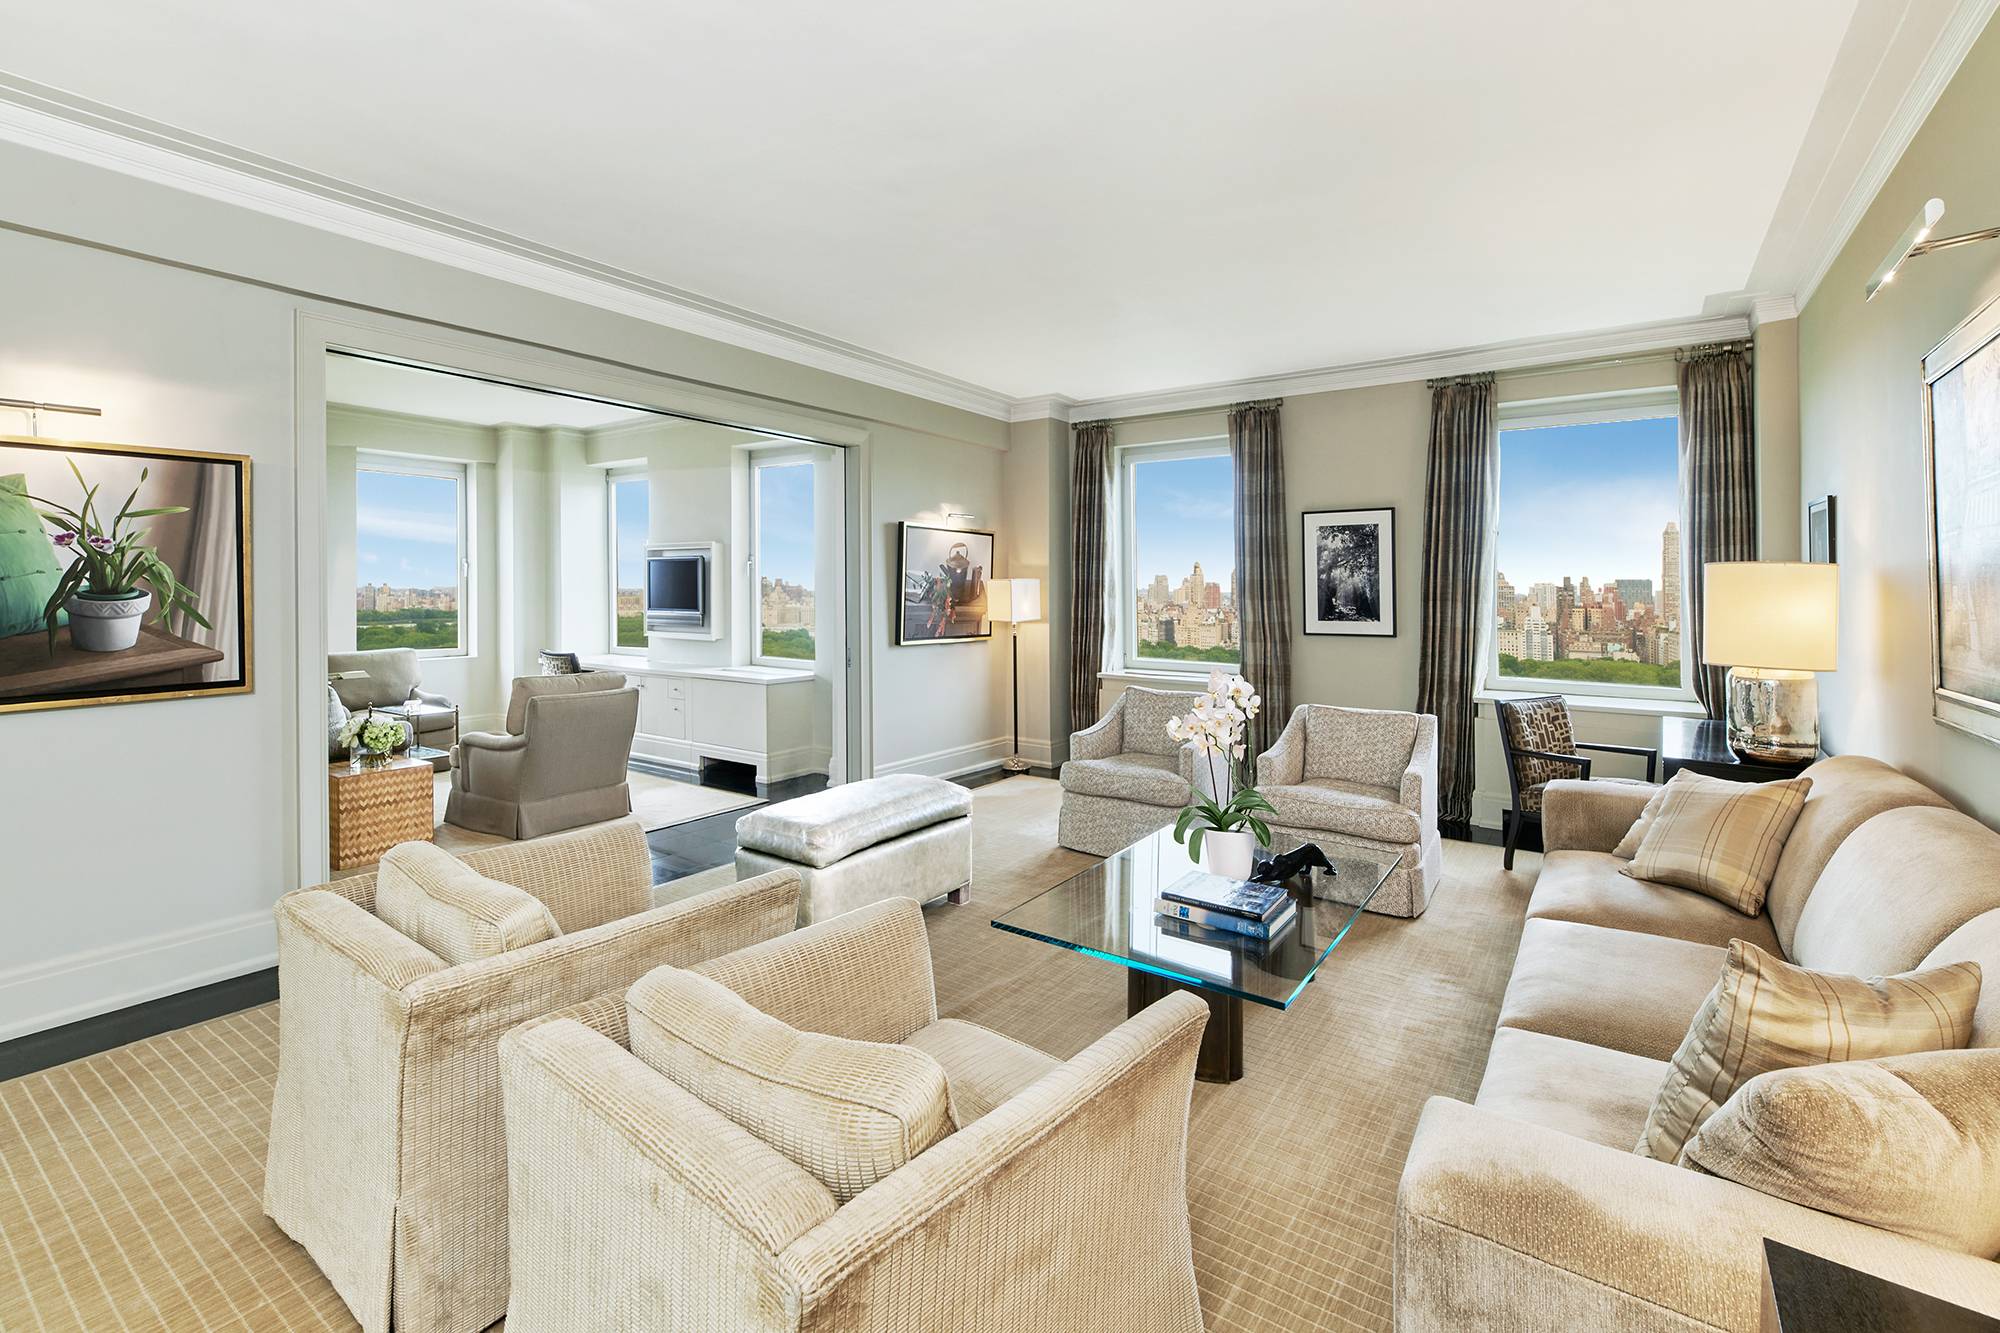 Views, Views, Views ! From the 27th floor in the Majestic tower on prime Central Park West, enjoy spectacular views of Central Park, the City Skyline and North, East, South ...